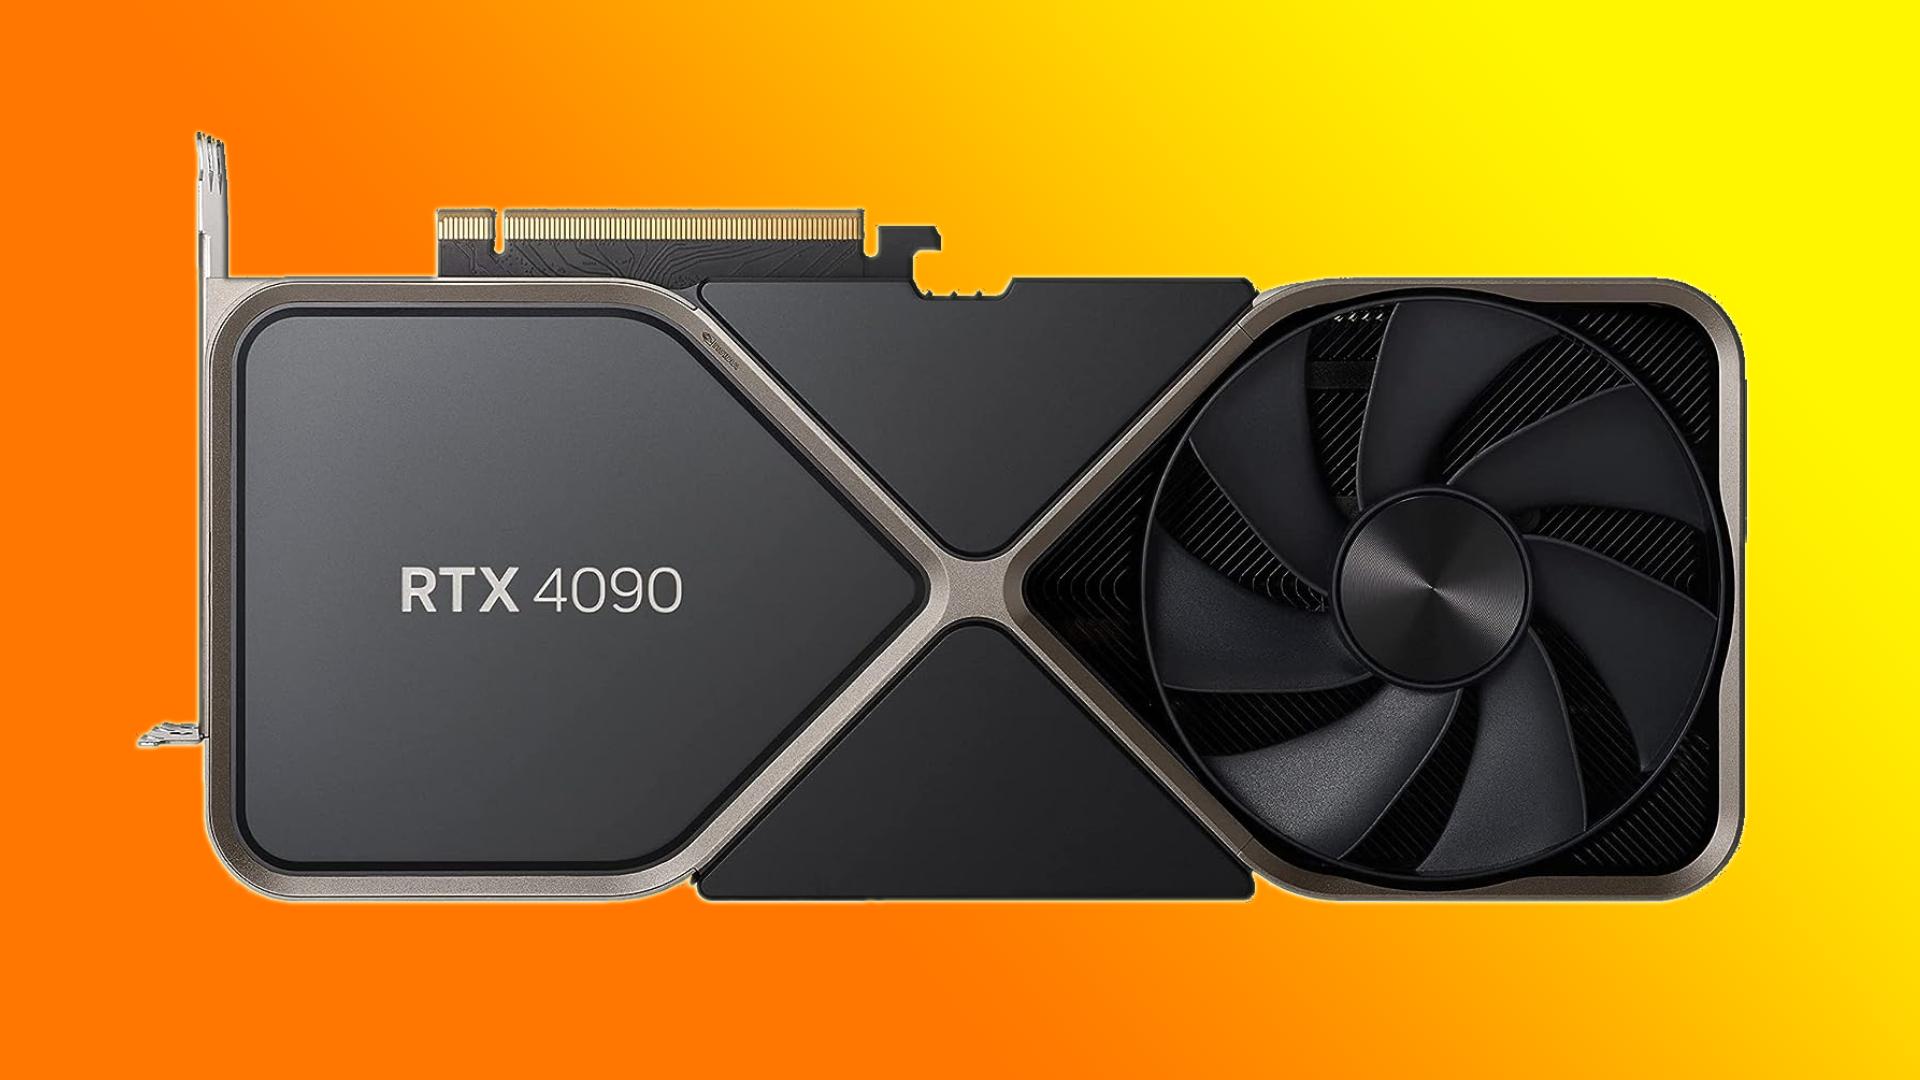 Chinese companies are repurposing GeForce RTX 4090s into AI GPUs